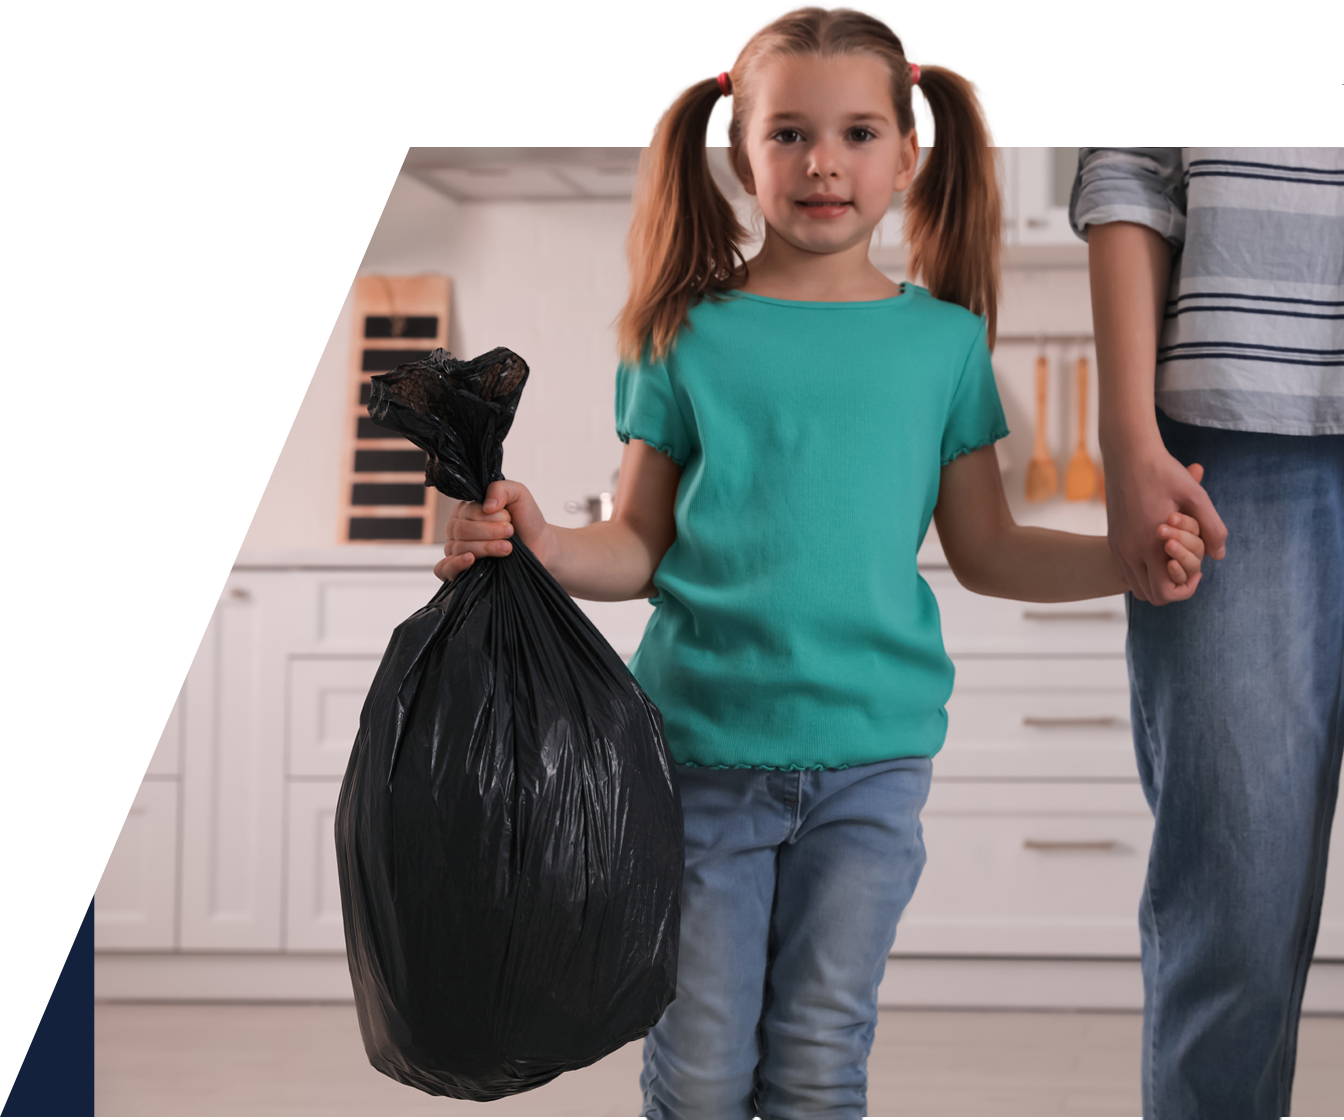 A woman and a little girl holding a black garbage bag.